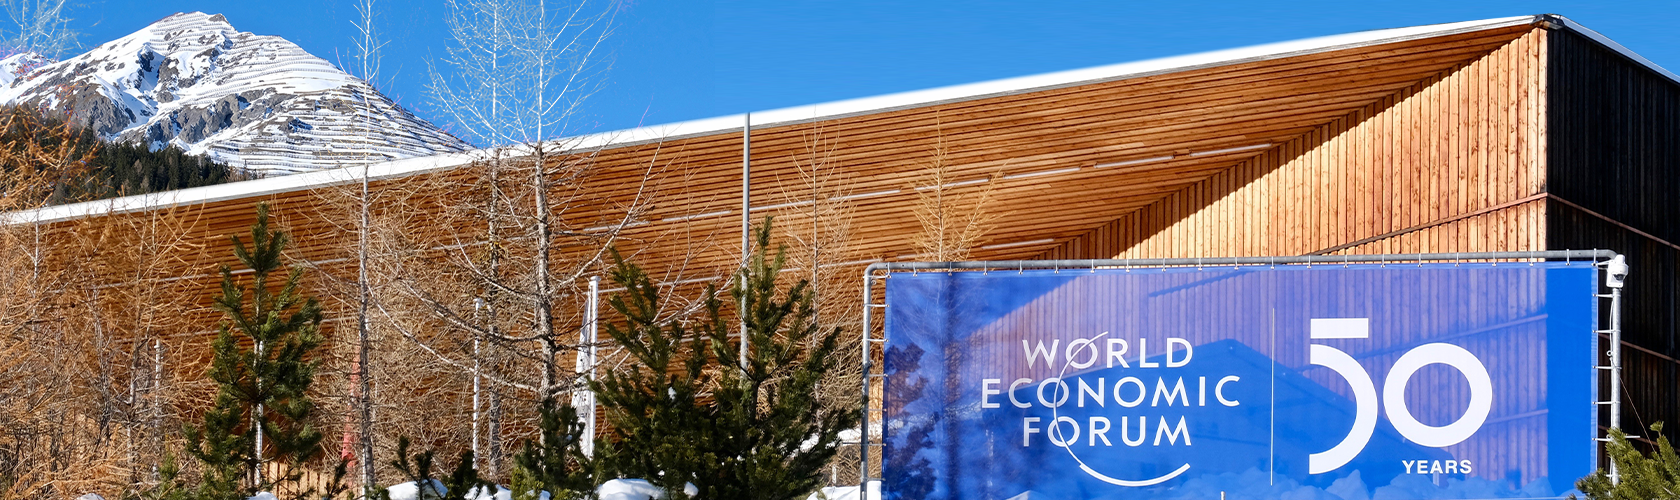 Partnering With the World Economic Forum to Lead the Energy Transition